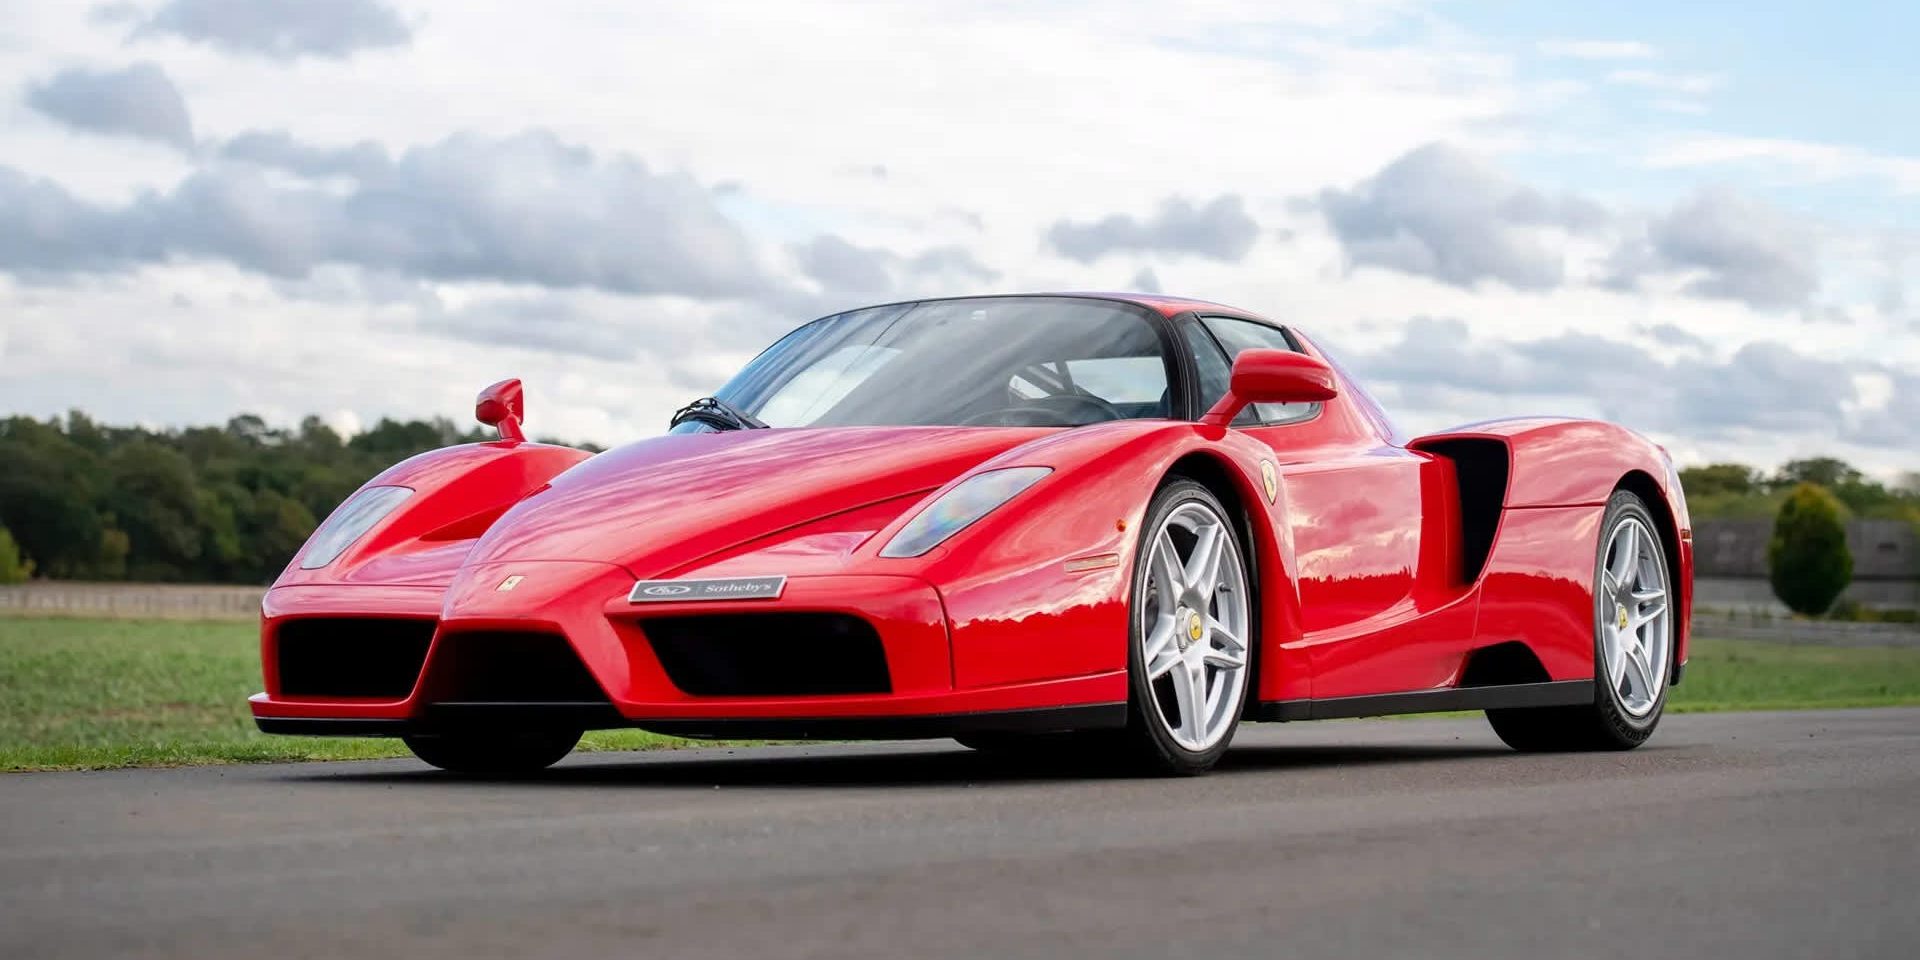 Ferrari Enzo designer busted at 128km/h in 40km/h zone – in an Enzo